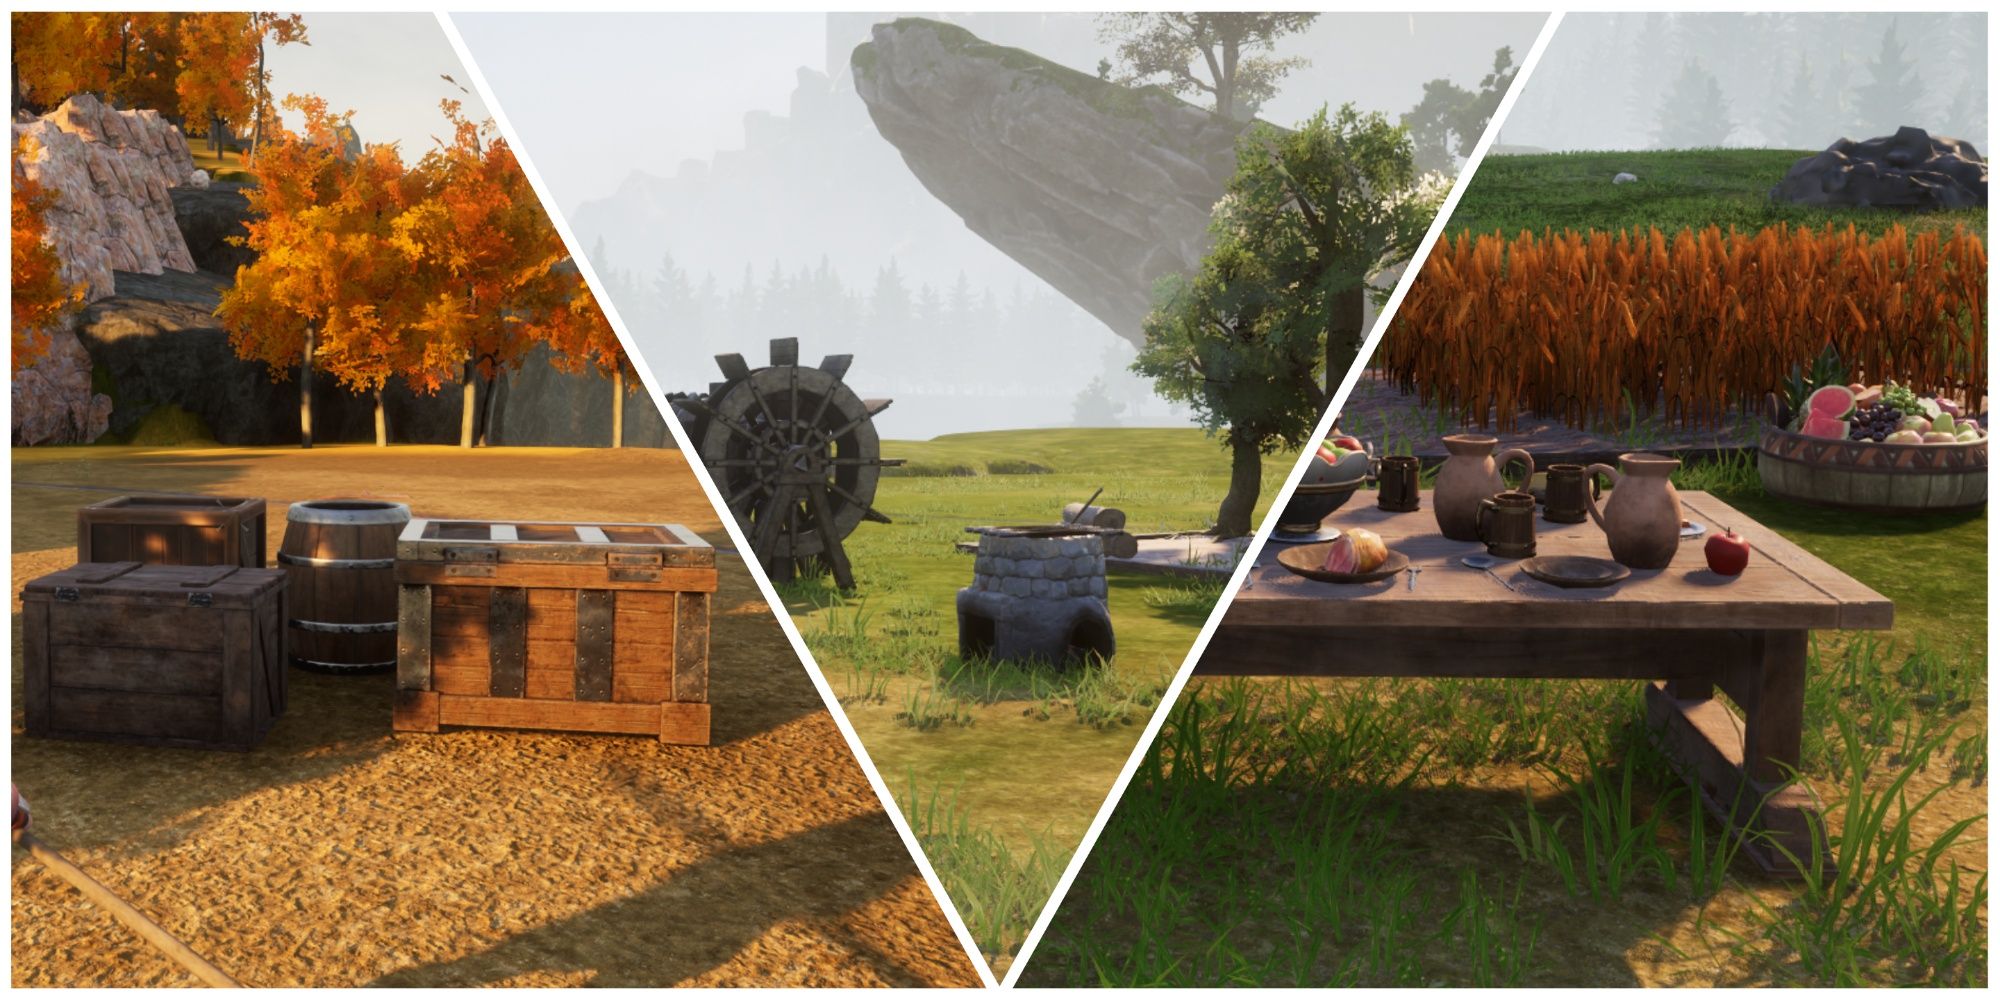 Storage boxes, crusher, firepit and wheat plantation in Palworld